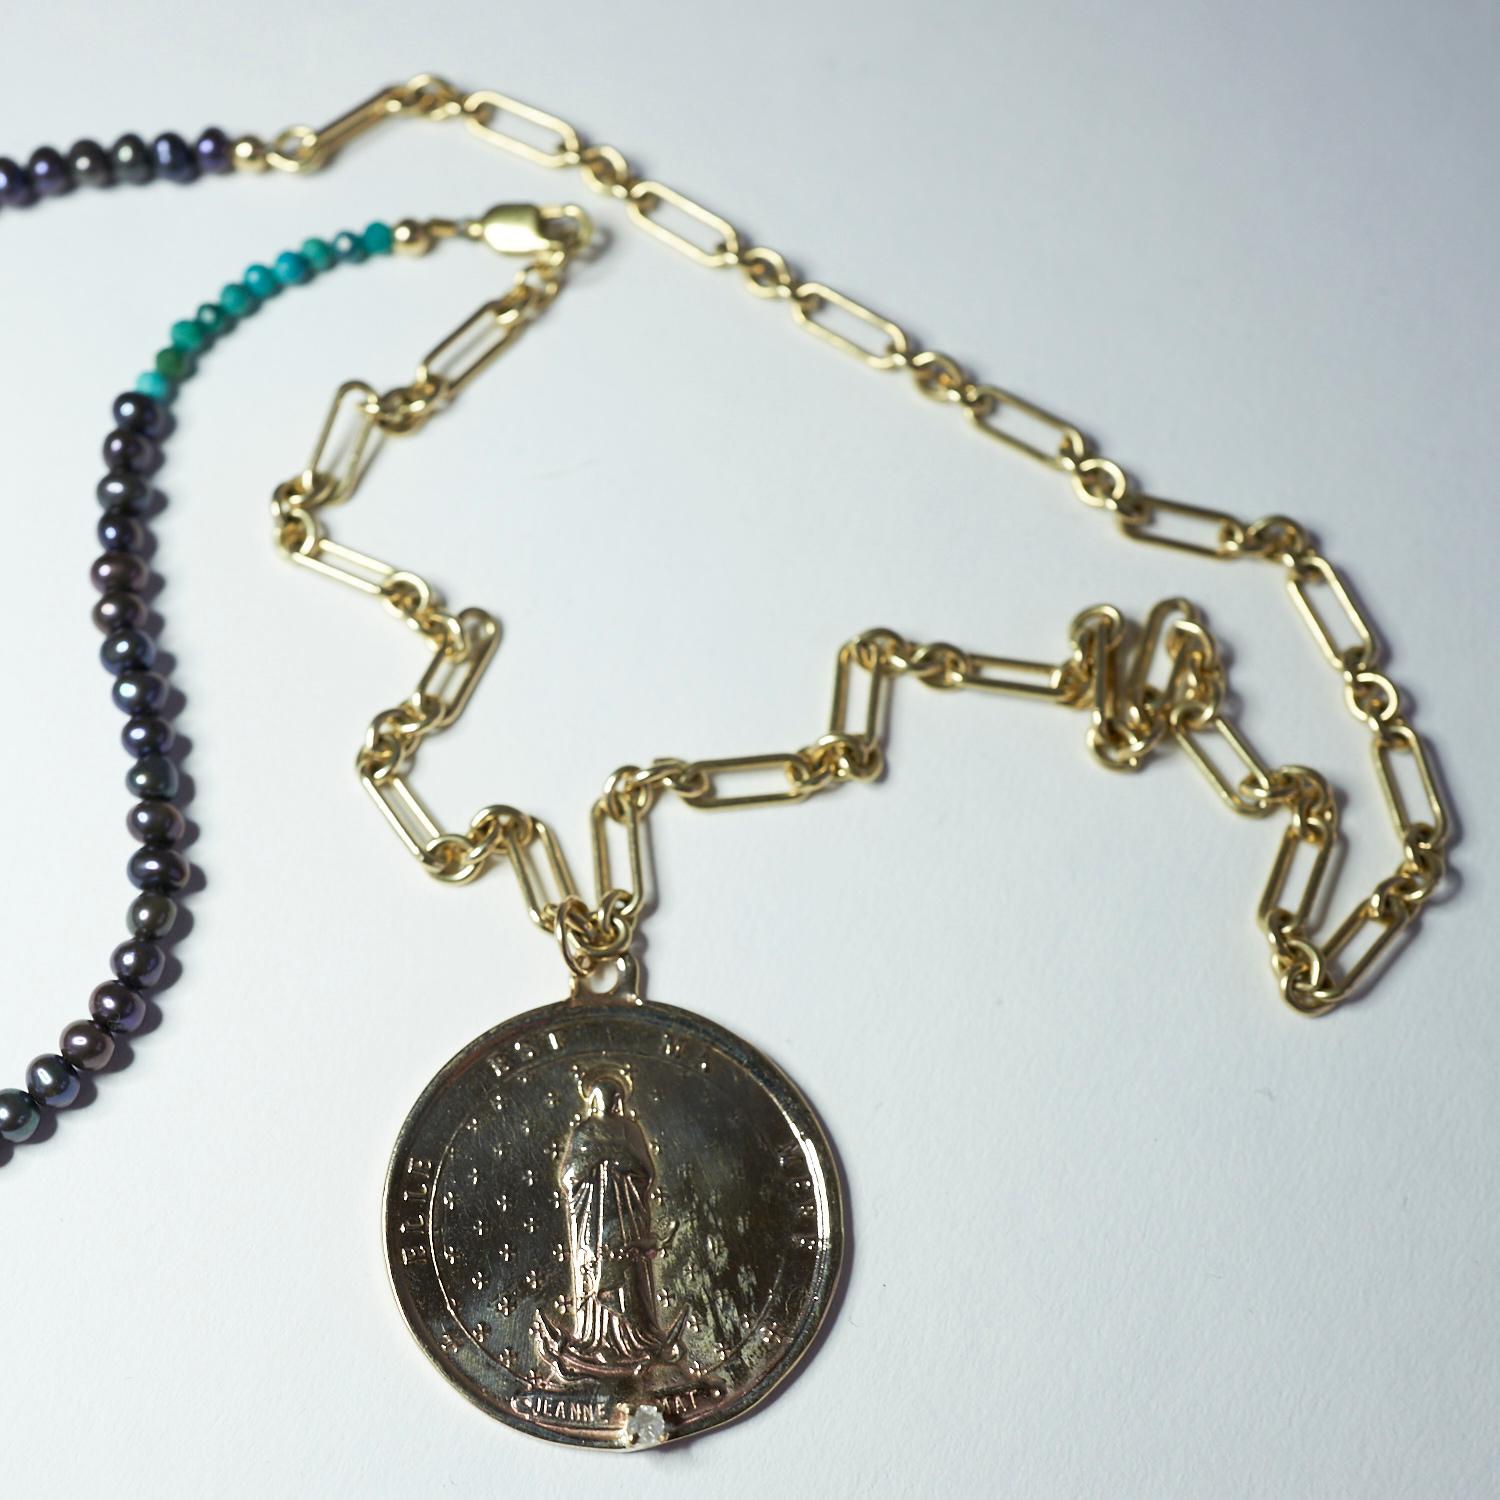 Long Chain Necklace Medal Coin Pendant Diamond Turquoise Beads J Dauphin In New Condition For Sale In Los Angeles, CA